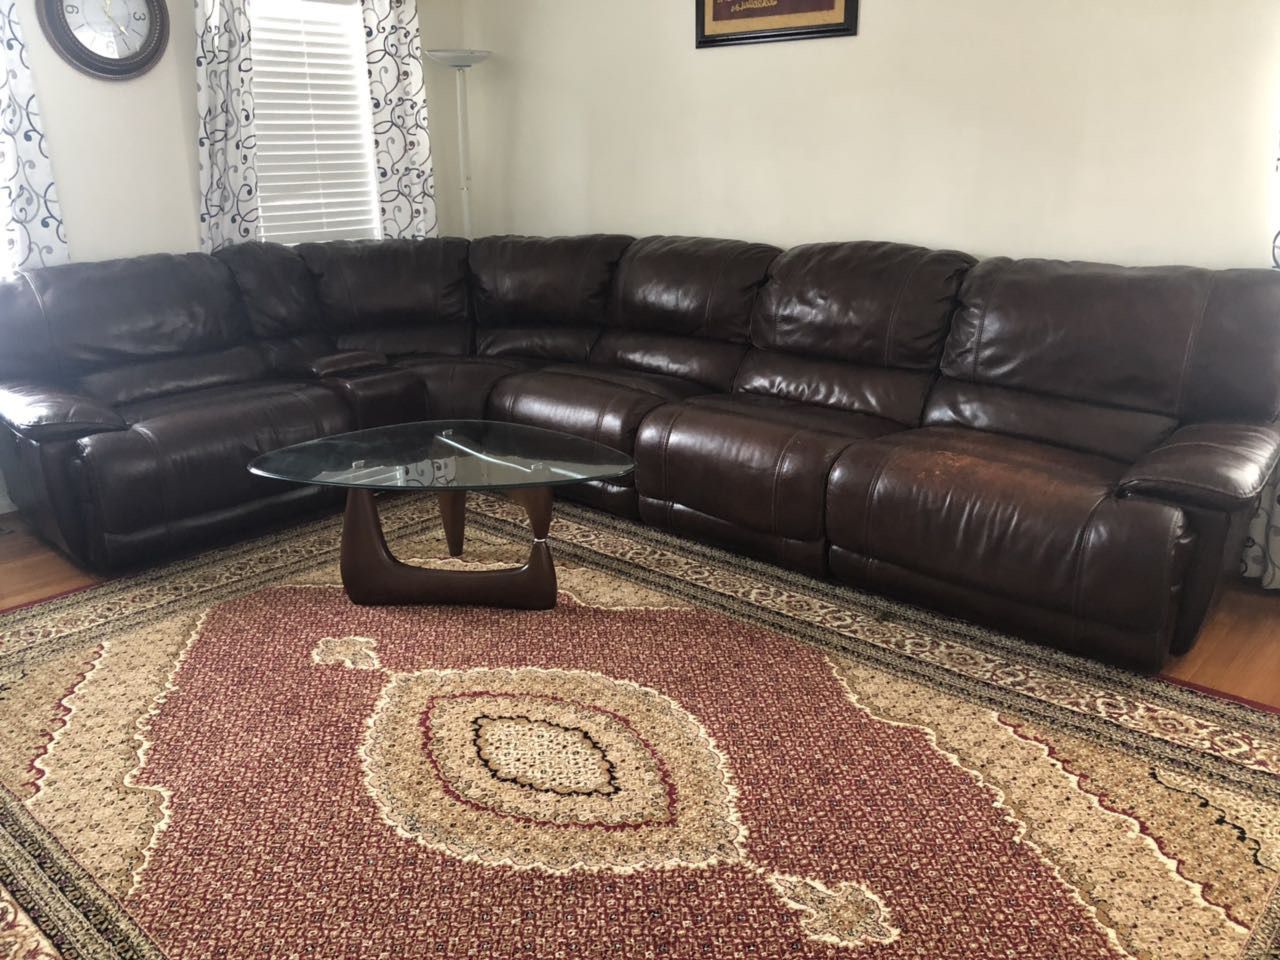 Sectional recliner sofa set with coffee table and 2 side tables